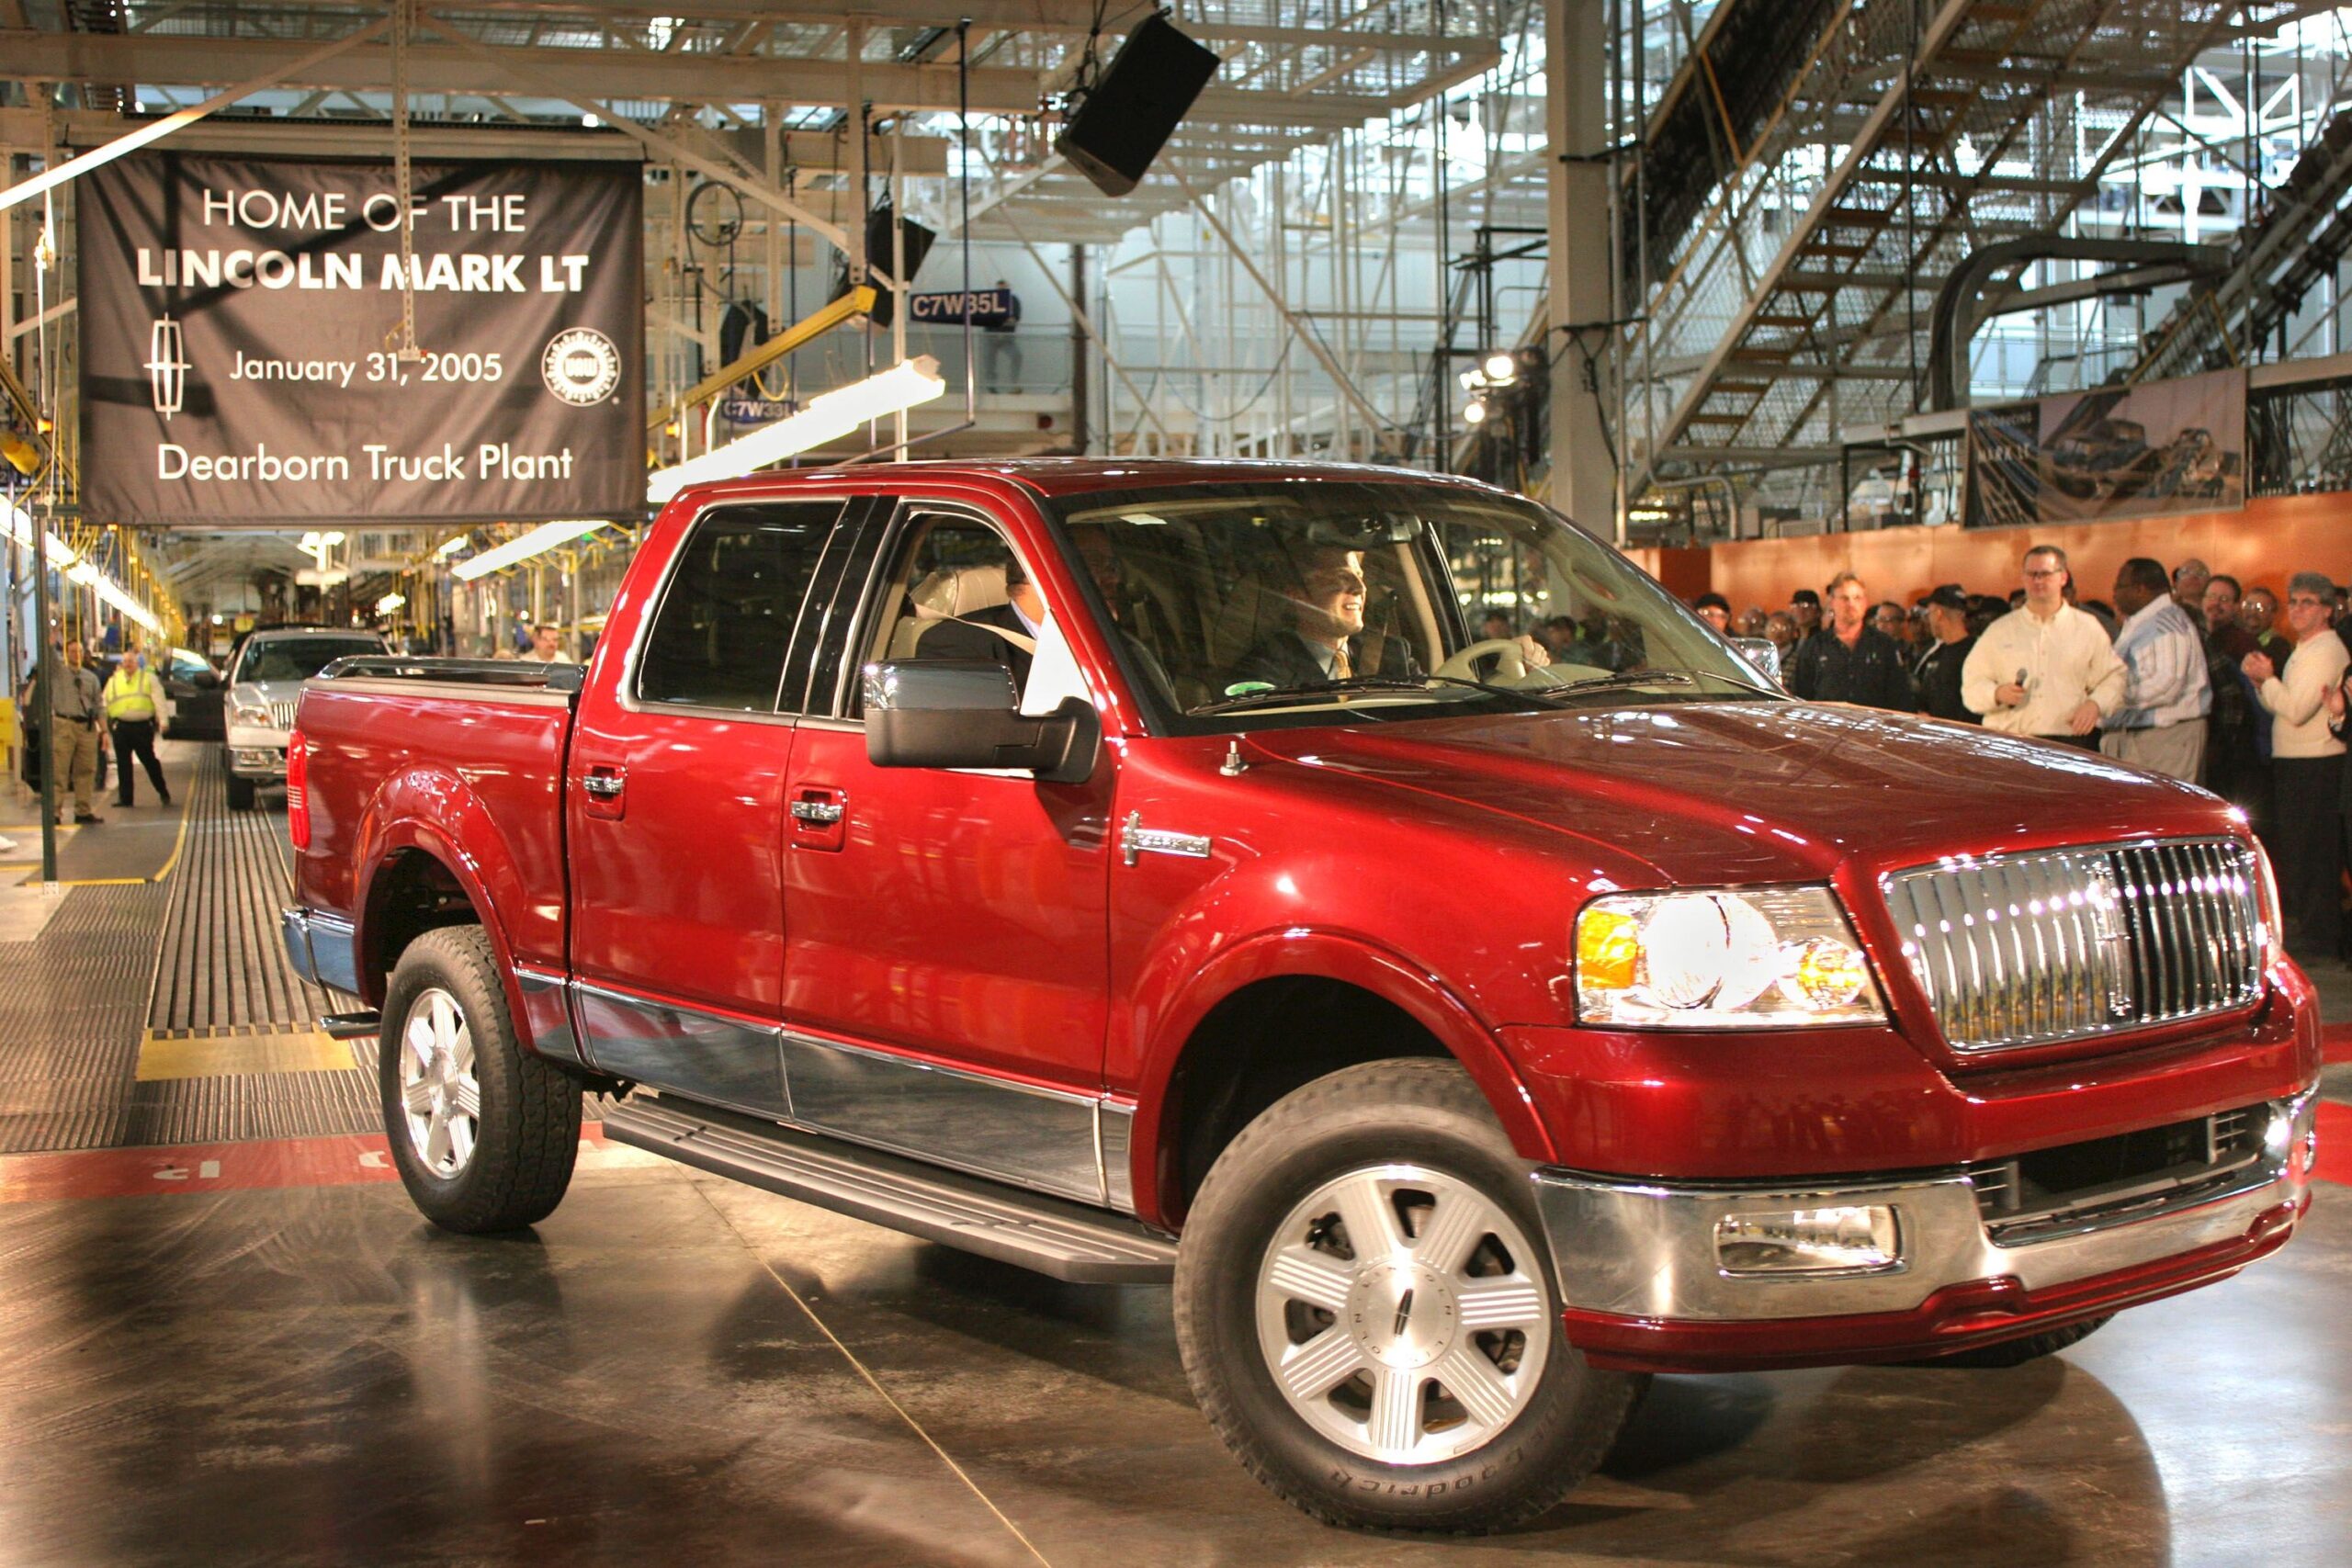 2021 Lincoln Pickup Truck Engine